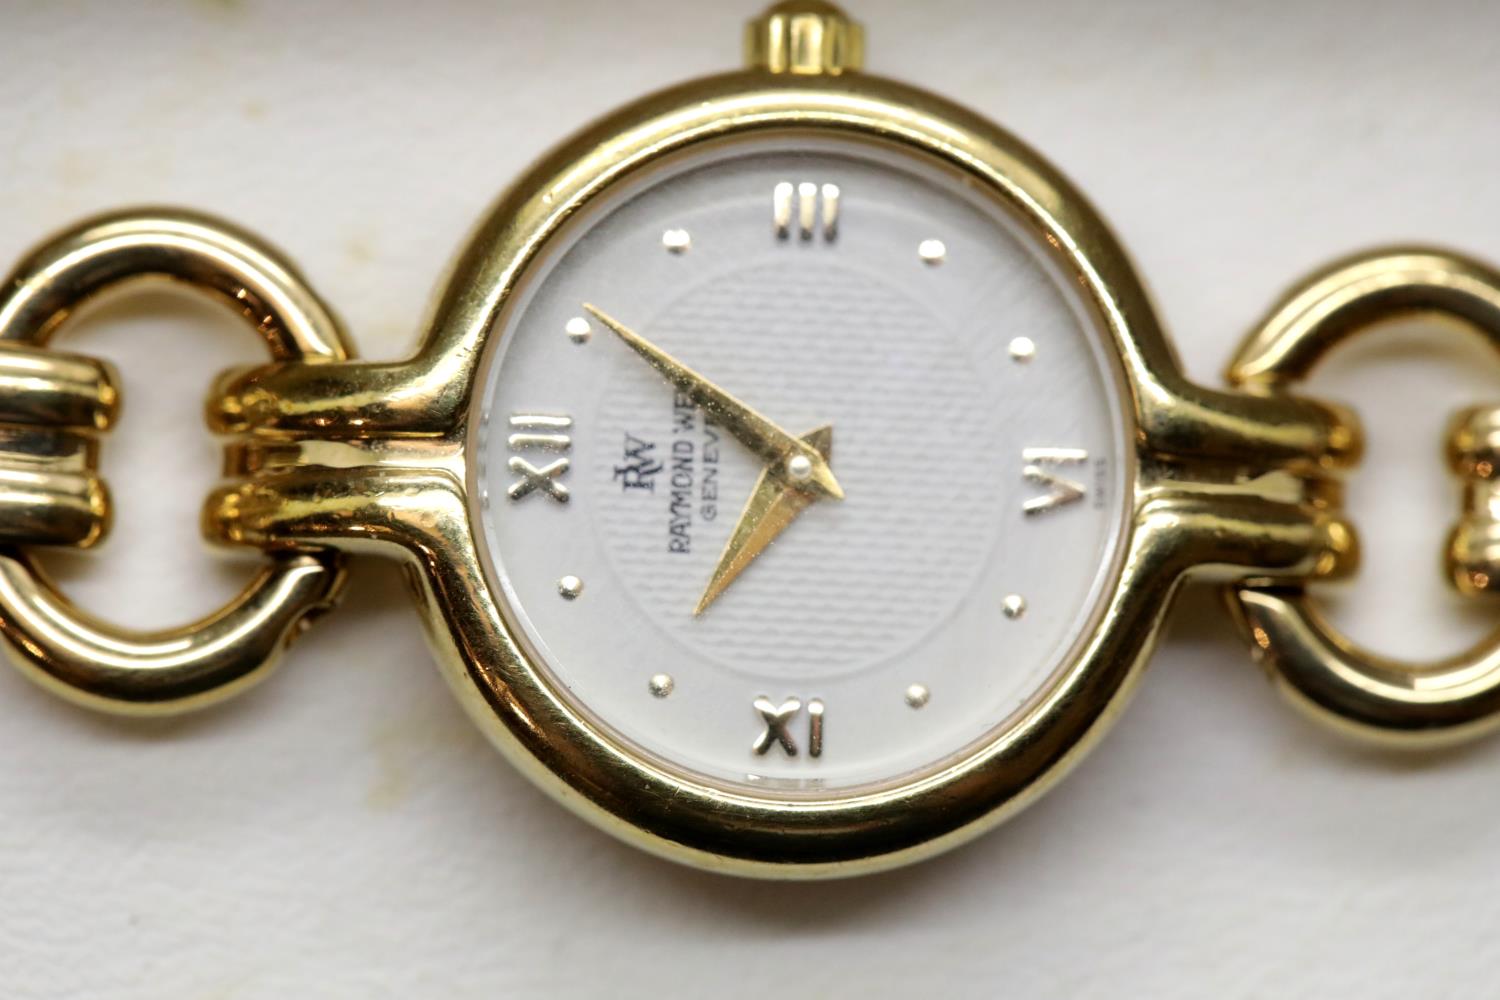 Ladies Raymond Weil gold plated cocktail watch with white dial in original box with paperwork. P&P